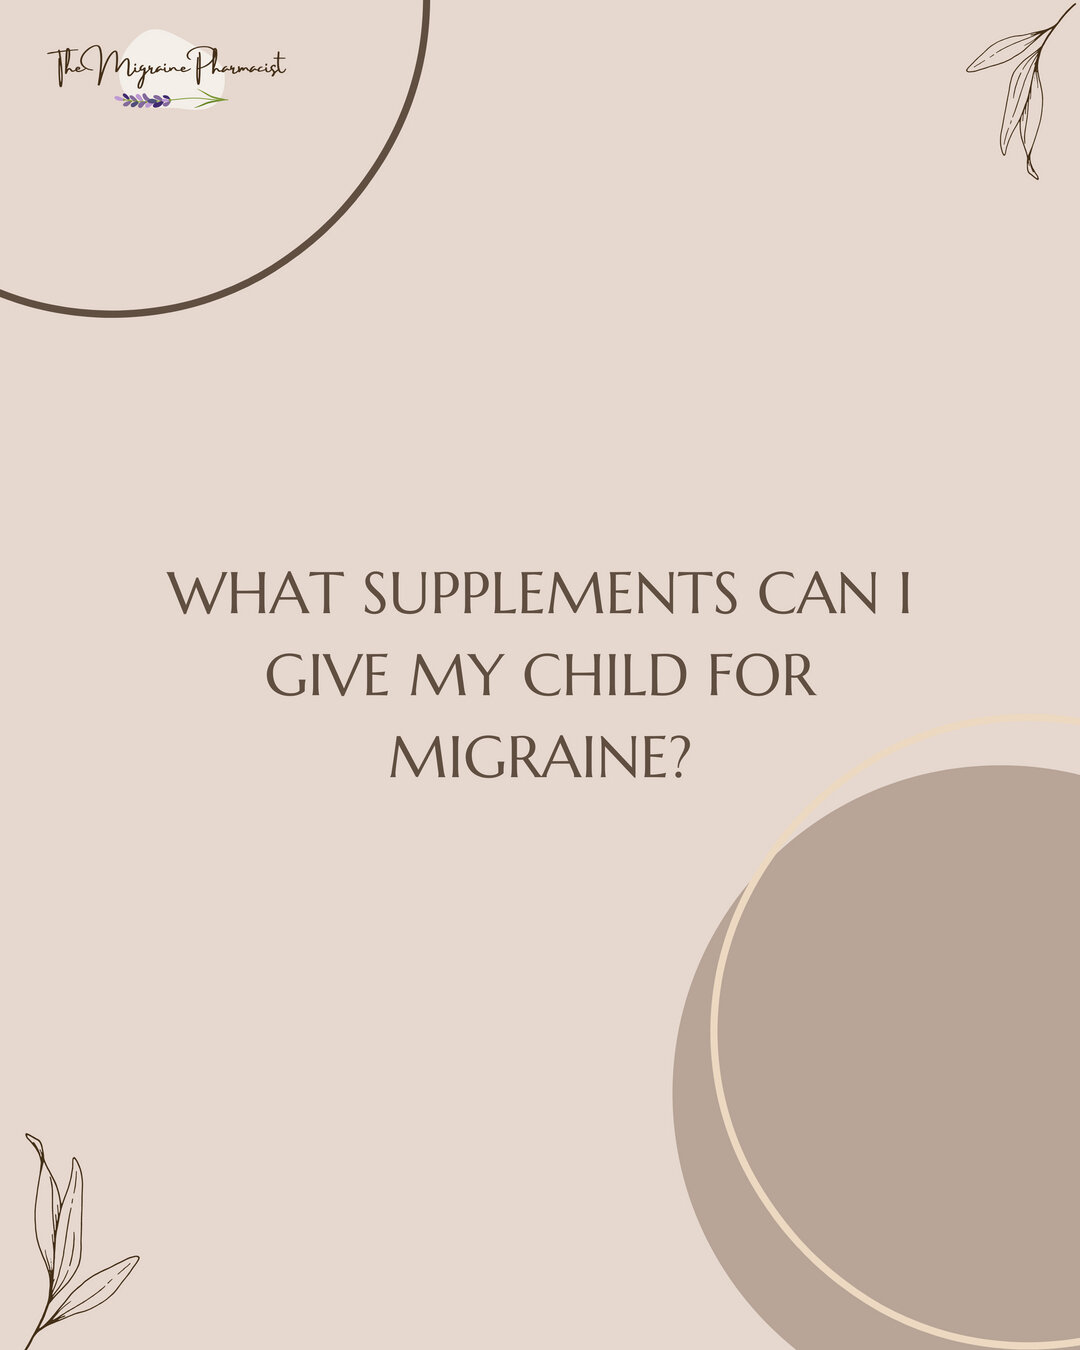 Very few clinical trials are conducted on supplements for children living with migraine. ​​​​​​​​
​​​​​​​​
Magnesium may reduce migraine severity and frequency in children. The dose suggested for children is 9mg/kg/day for a soluble form of magnesium